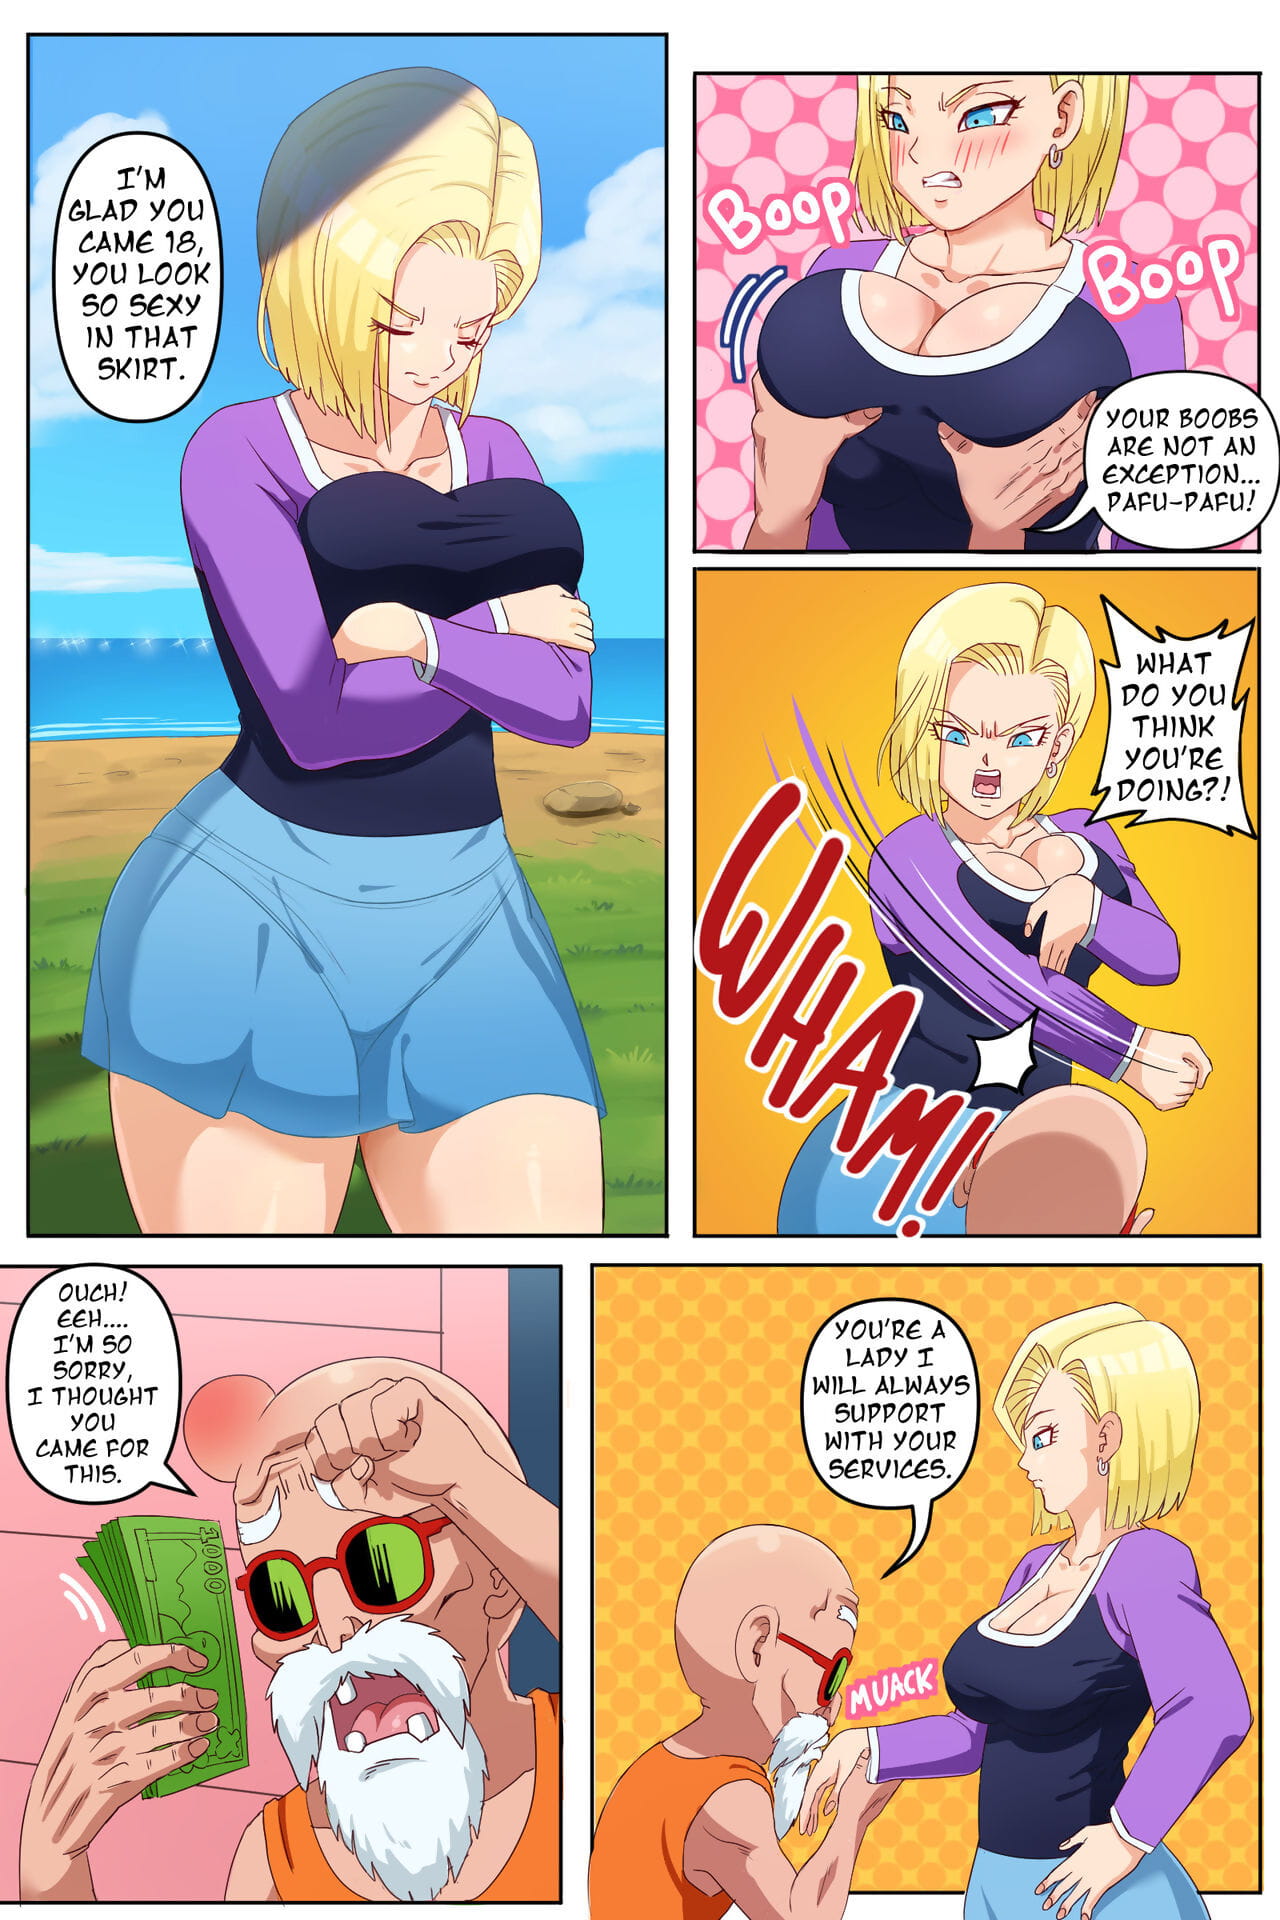 dragonball: Super pinkpawg – android 18 NTR – RD 1 page 1